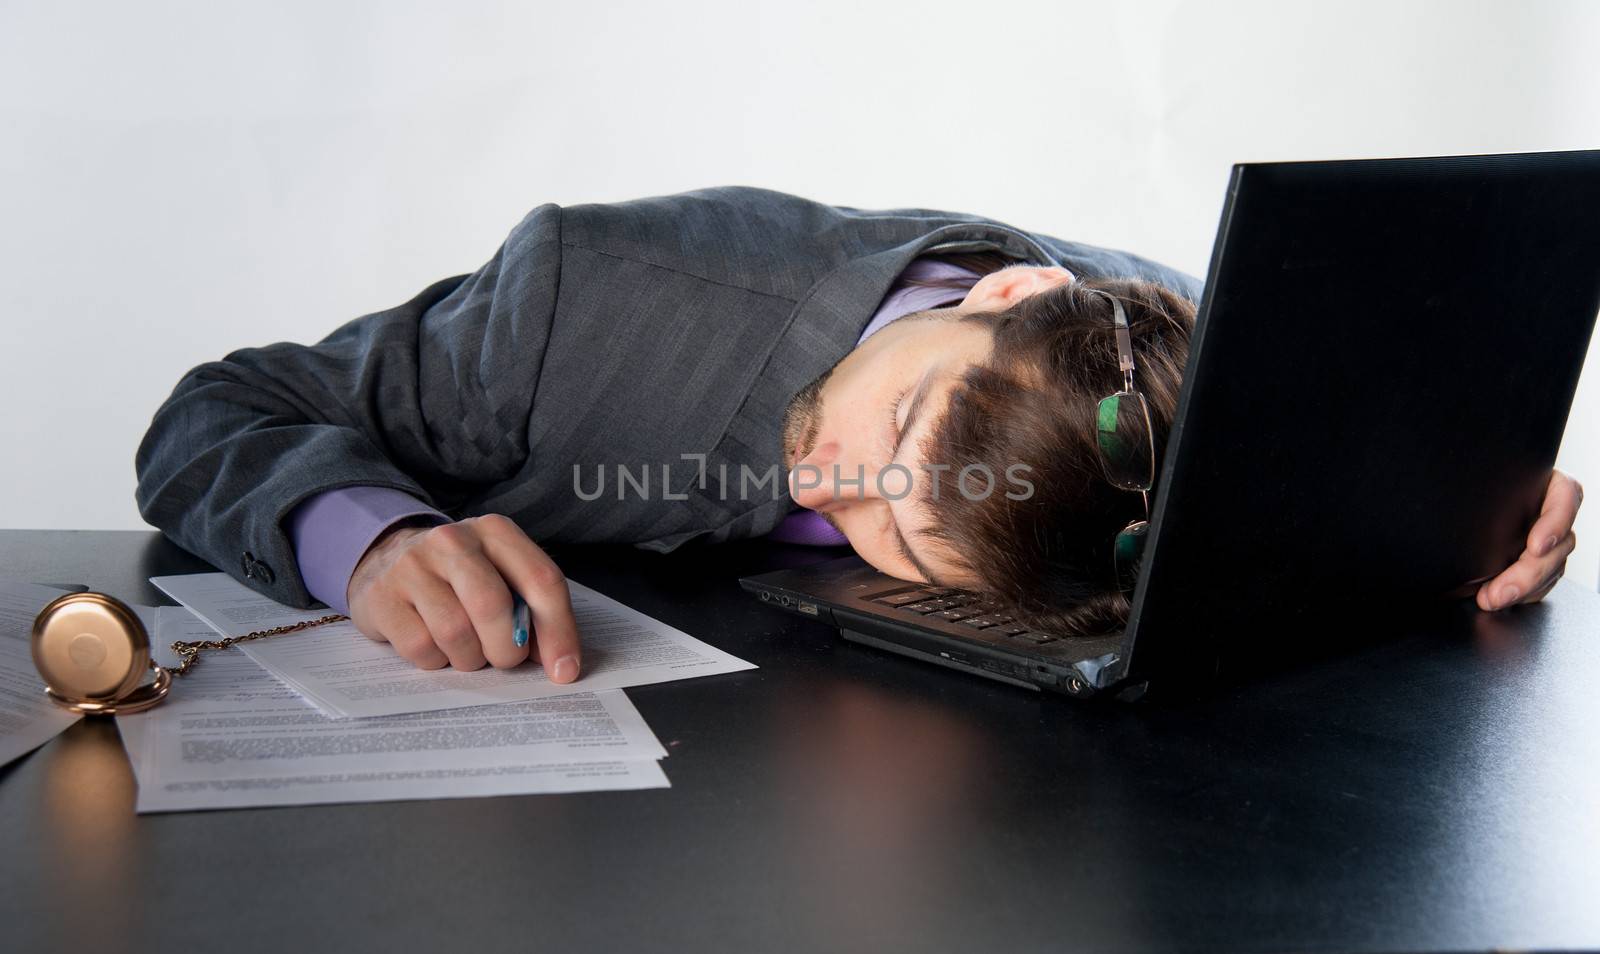 man asleep on a laptop in the workplace